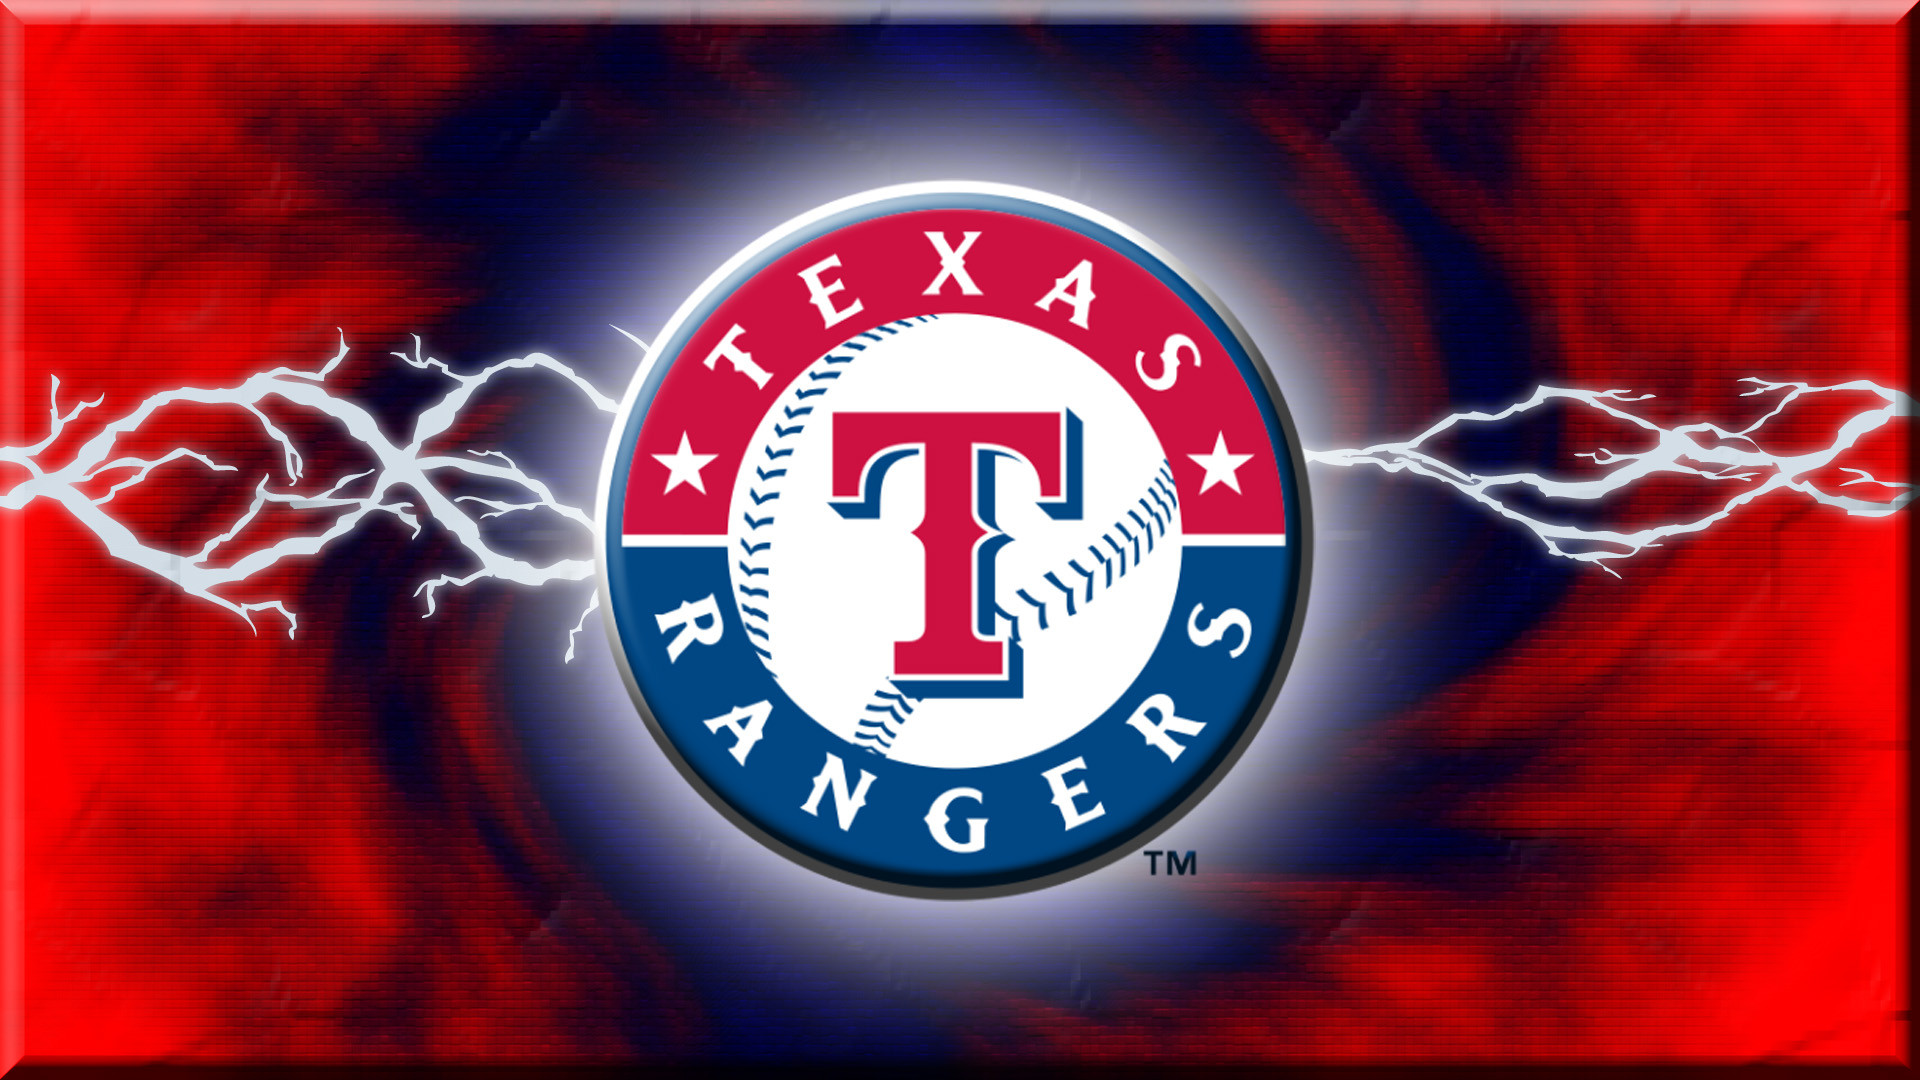 1920x1080 Download Texas Rangers wallpapers to your cell phone america | HD Wallpapers  | Pinterest | Wallpaper and Wallpaper backgrounds